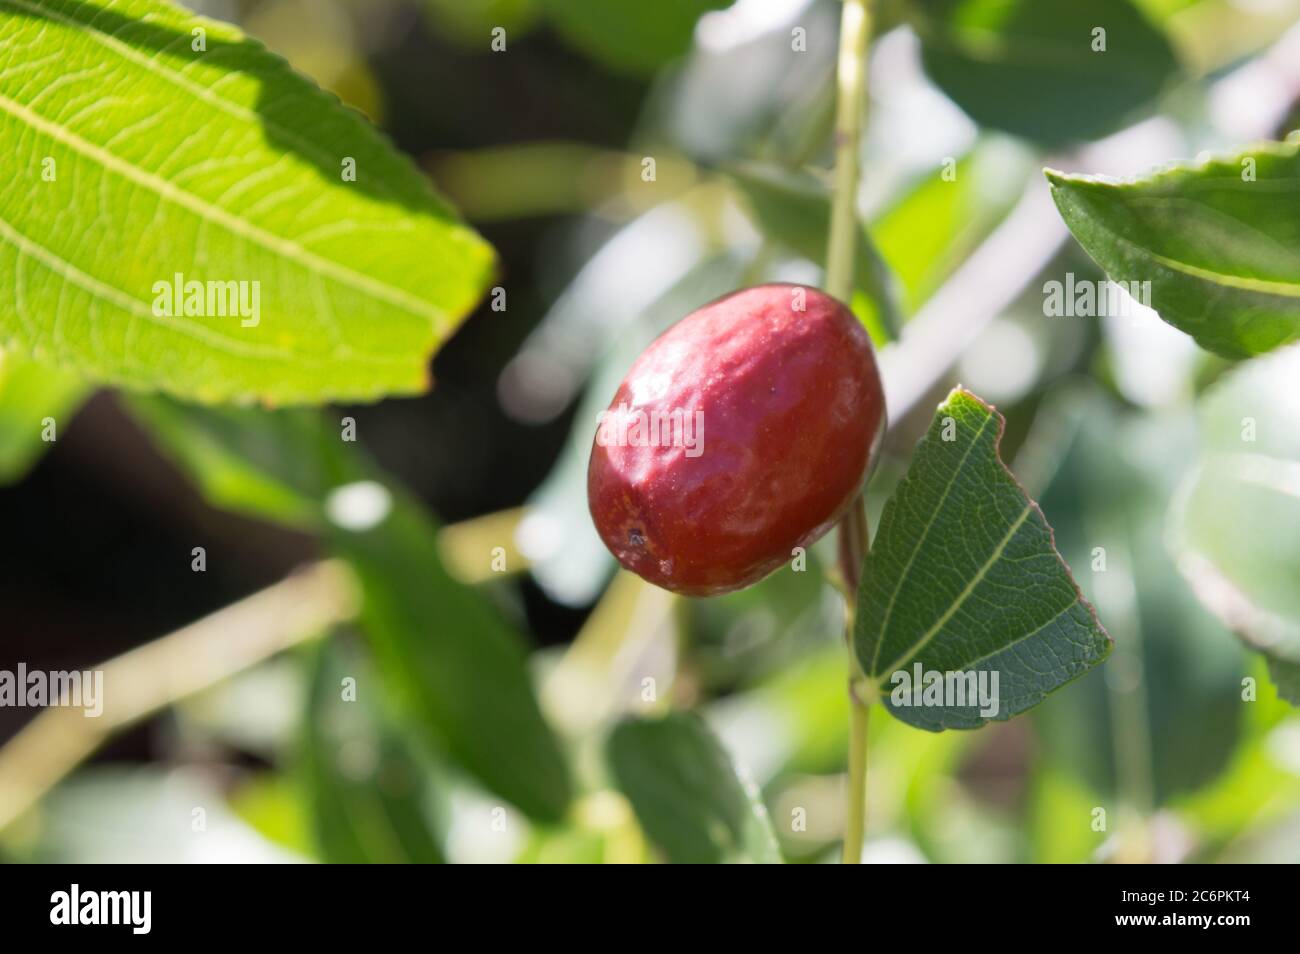 Mediterranean fruit, Ziziphus jujuba, called chinese date or red date Stock Photo